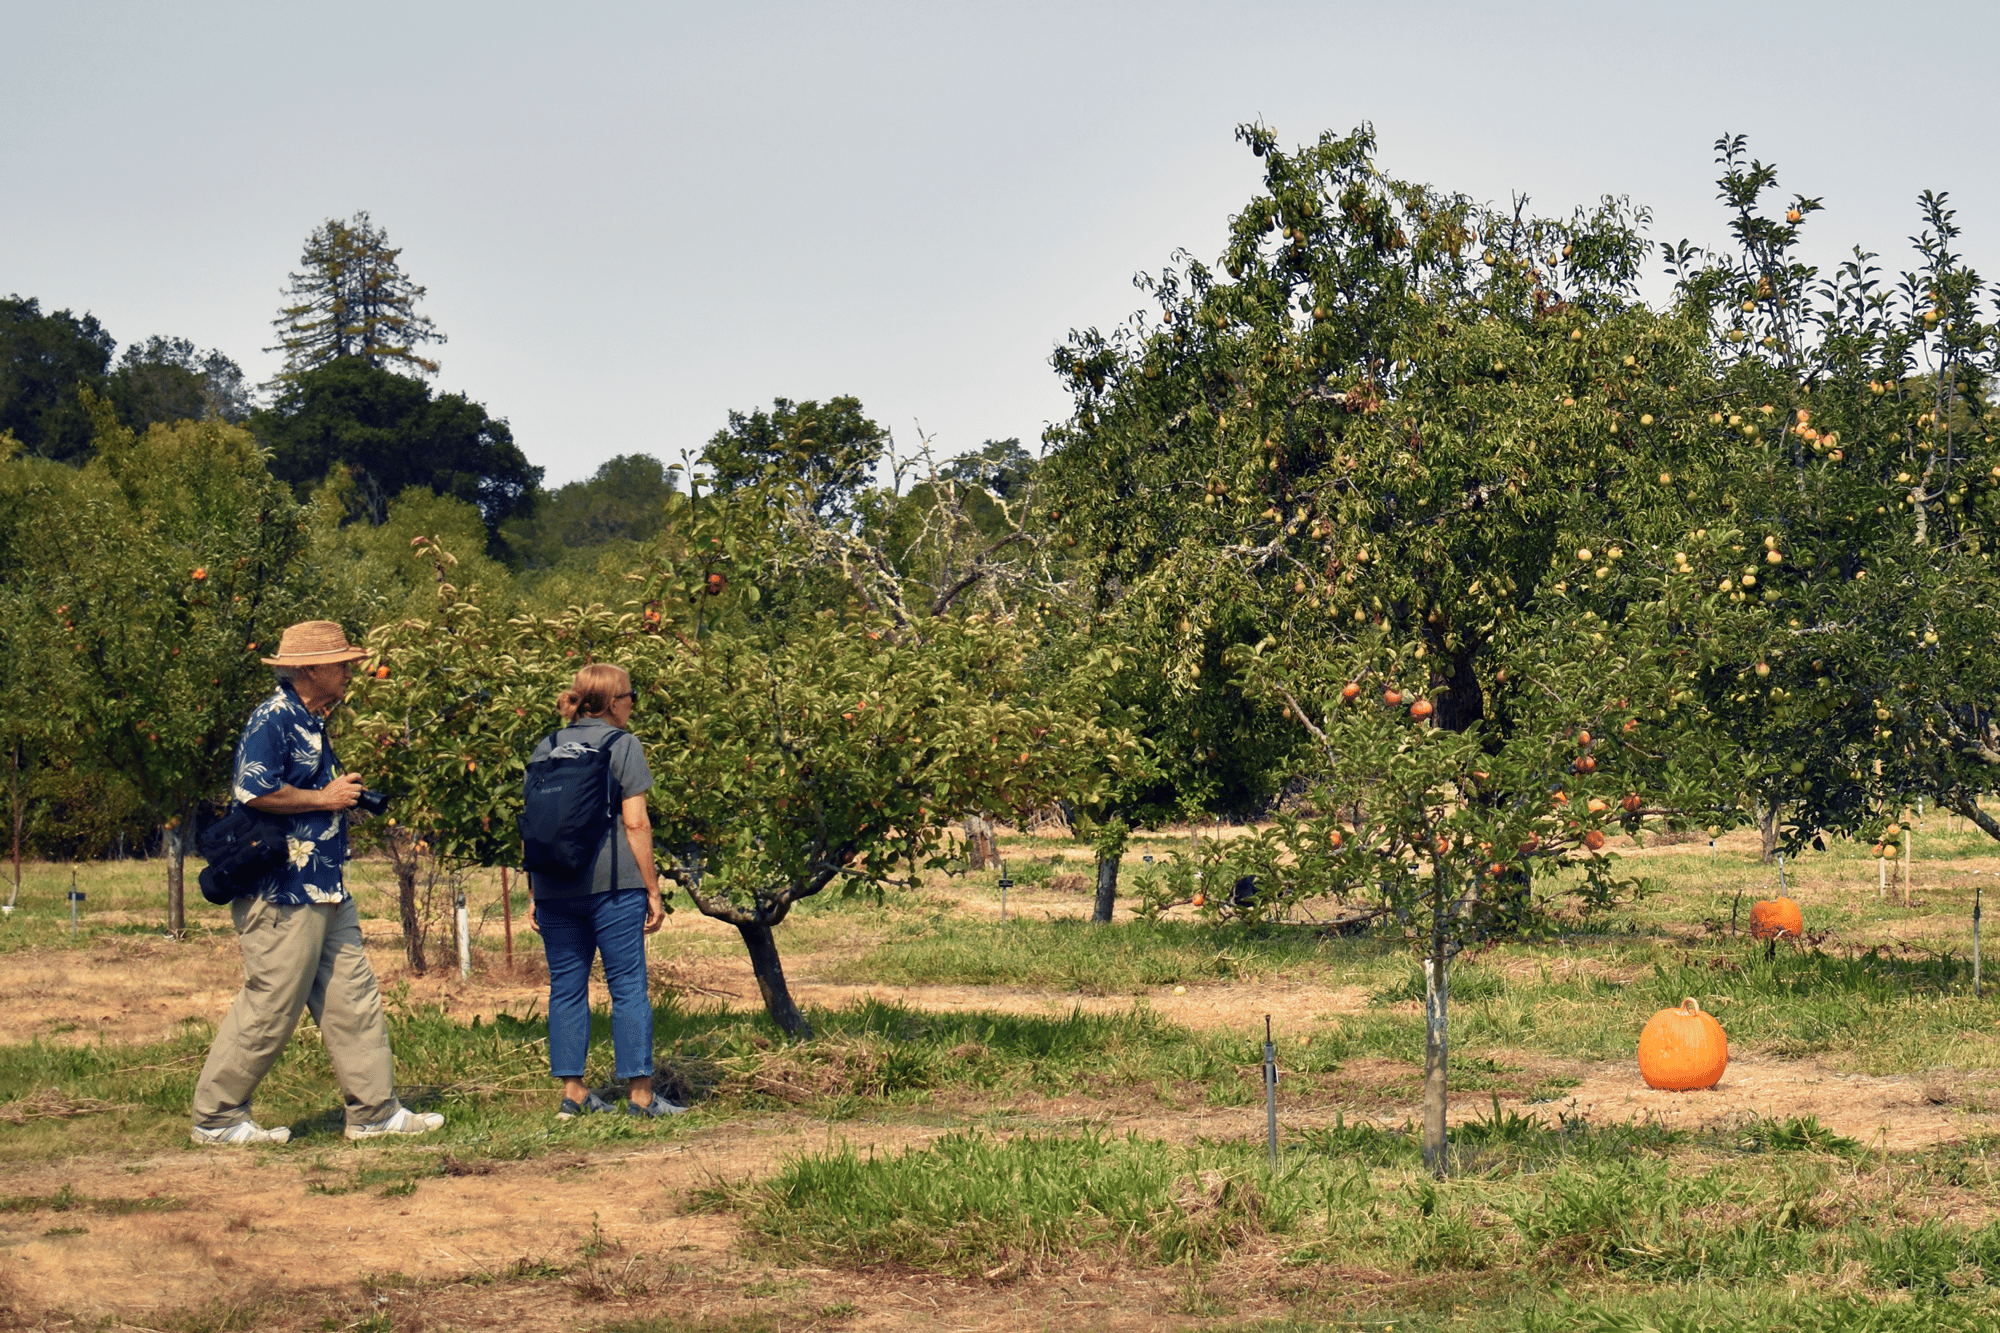 Exploring The Orchard Crop